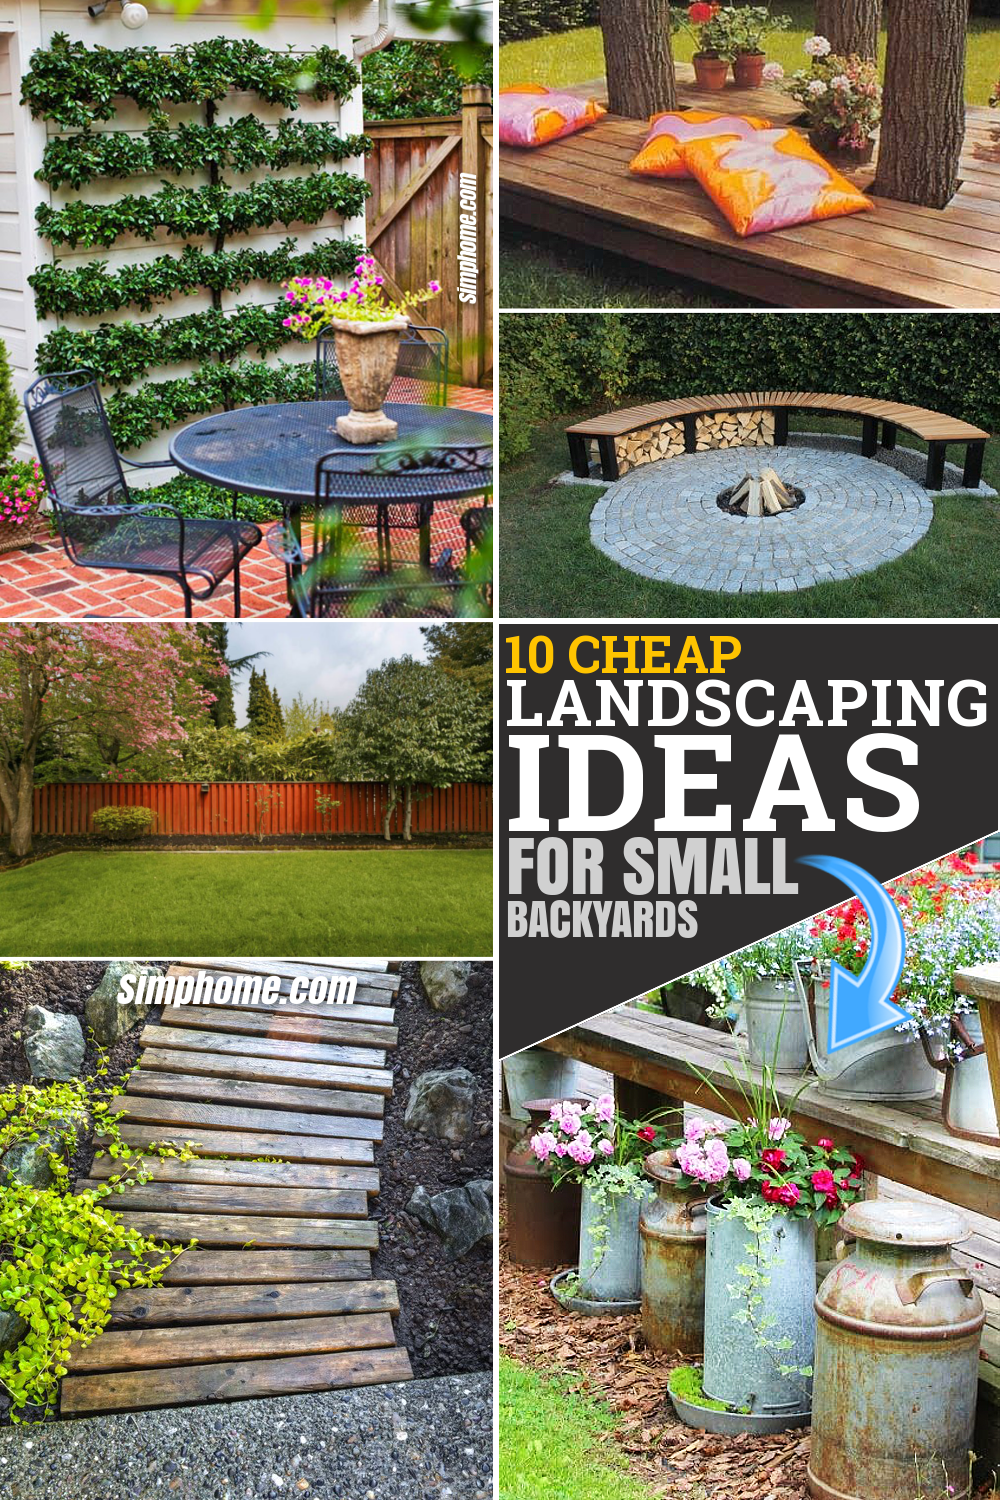 Backyard Landscaping Ideas For Small Yards